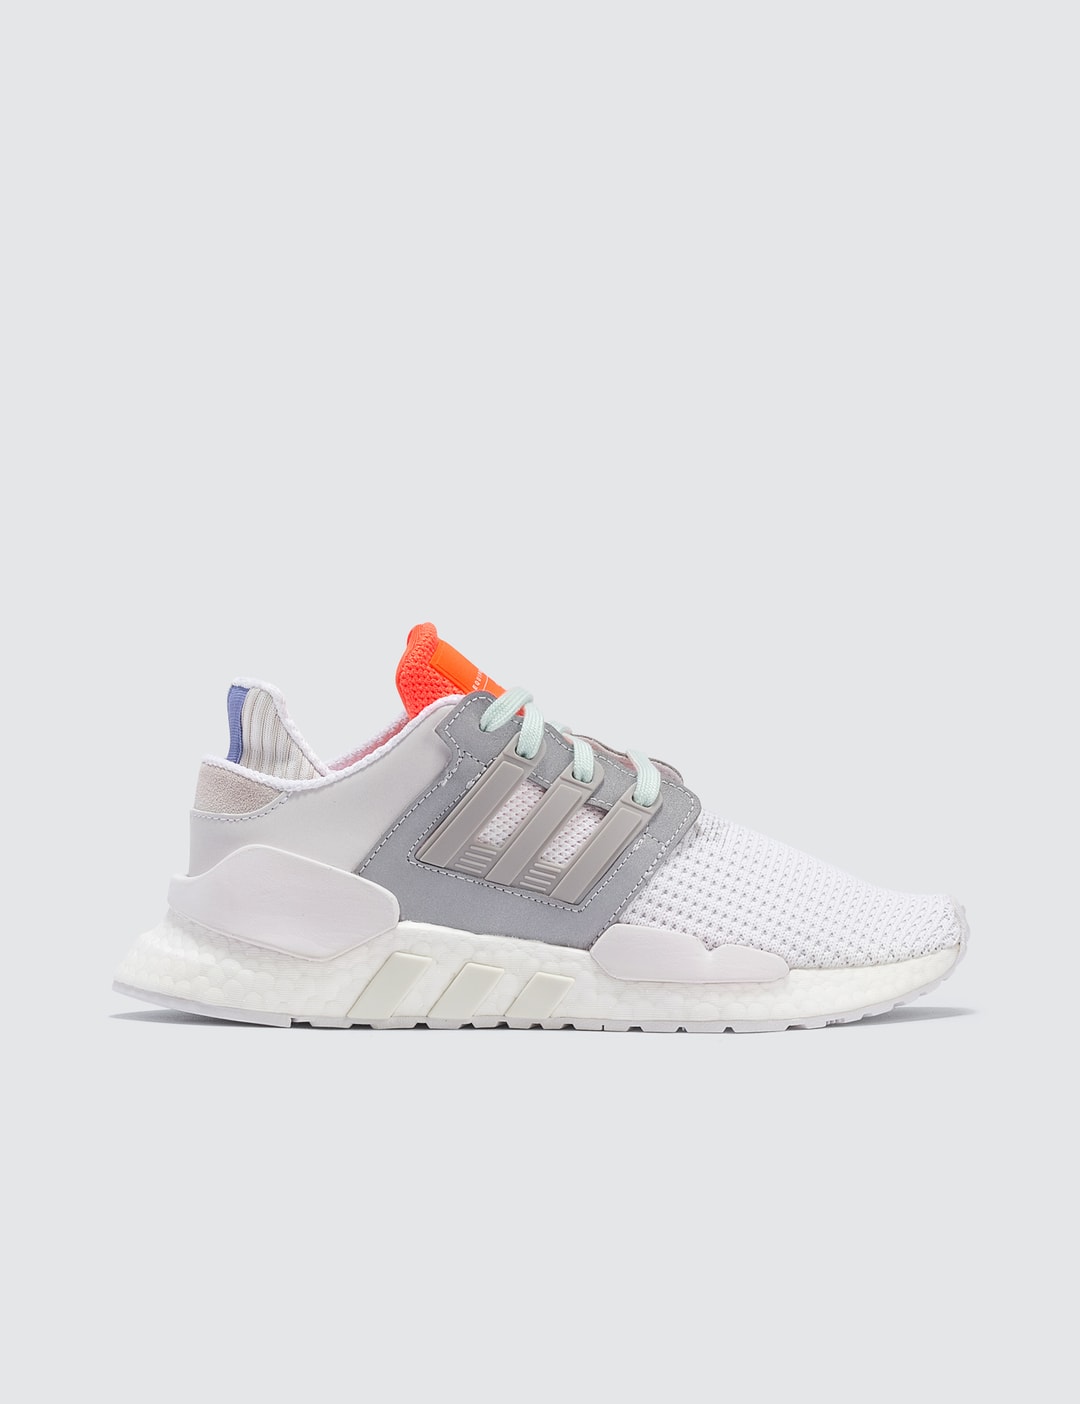 Adidas Originals - Eqt Support 91/18 W | HBX - Globally Curated Fashion and Lifestyle Hypebeast